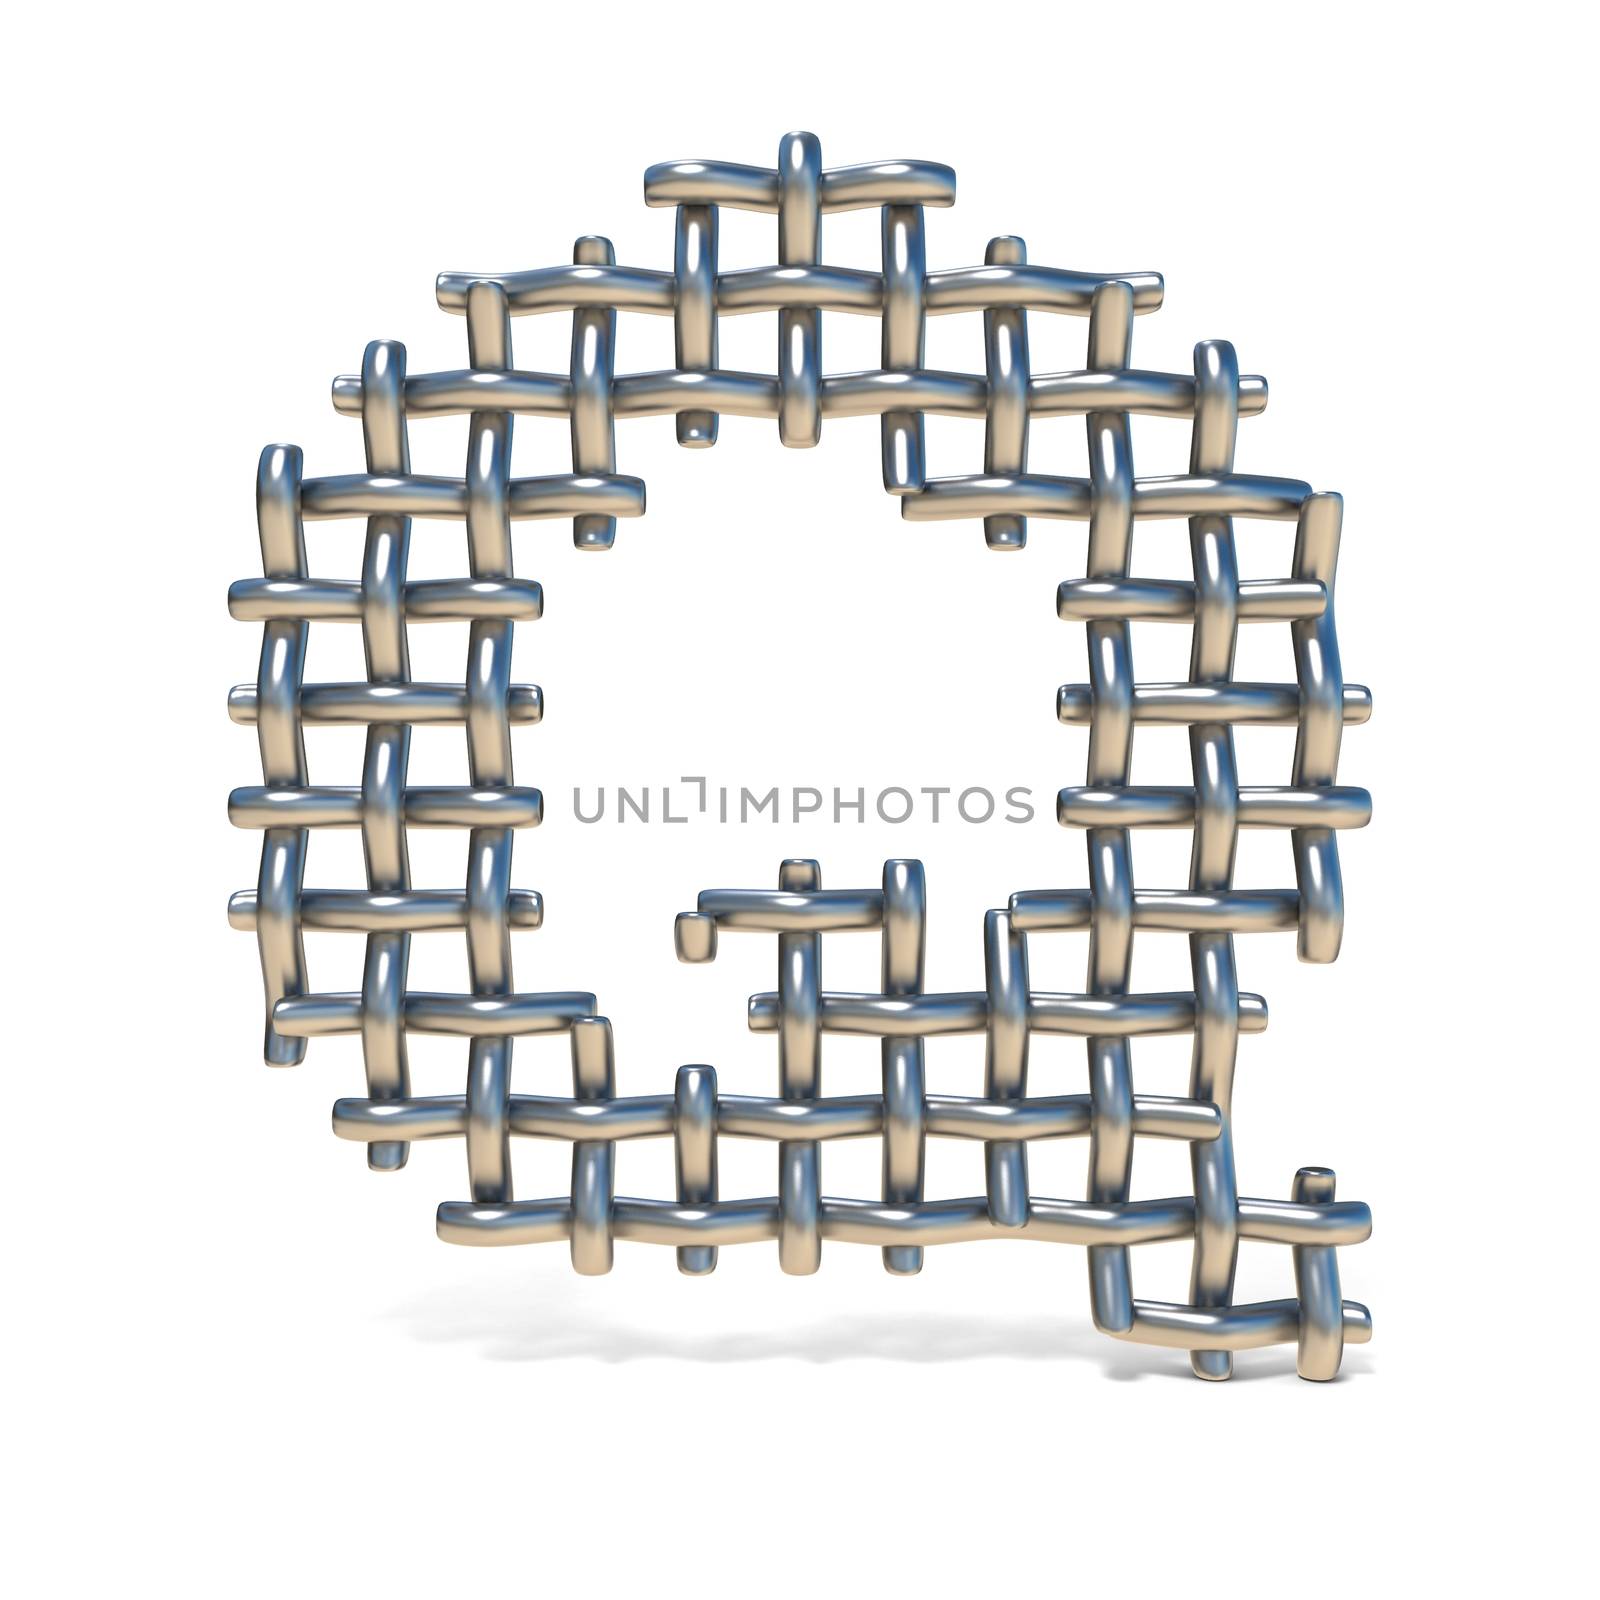 Metal wire mesh font LETTER Q 3D render illustration isolated on white background